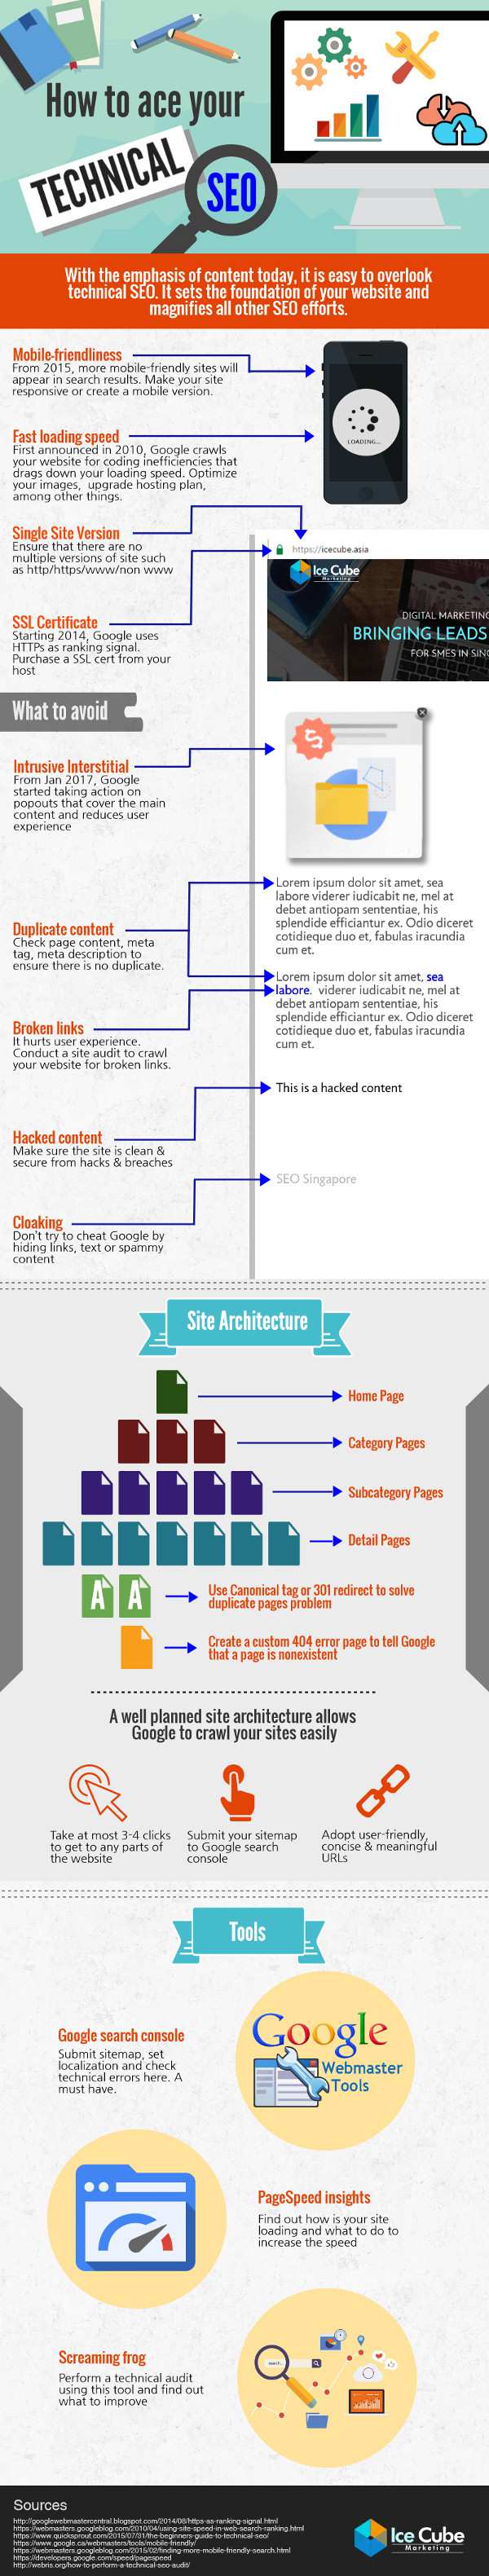 Technical SEO infographic